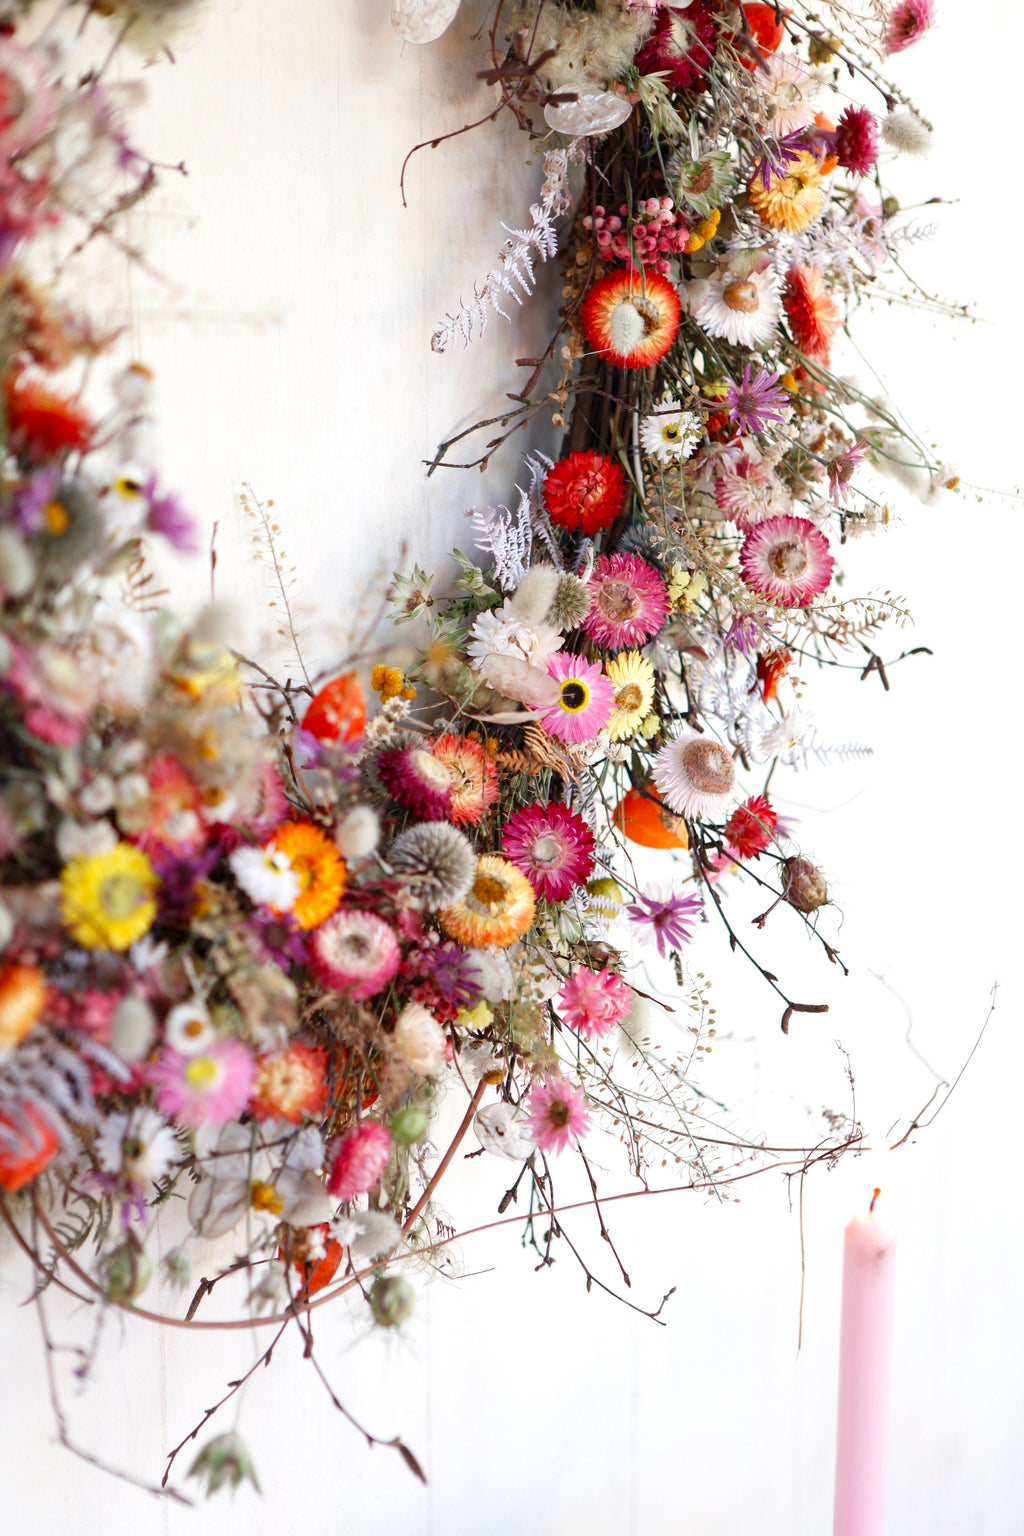 AUTUMN EVERLASTING FLOWER WREATH WORKSHOP 5th May 1pm Central Coast, NSW